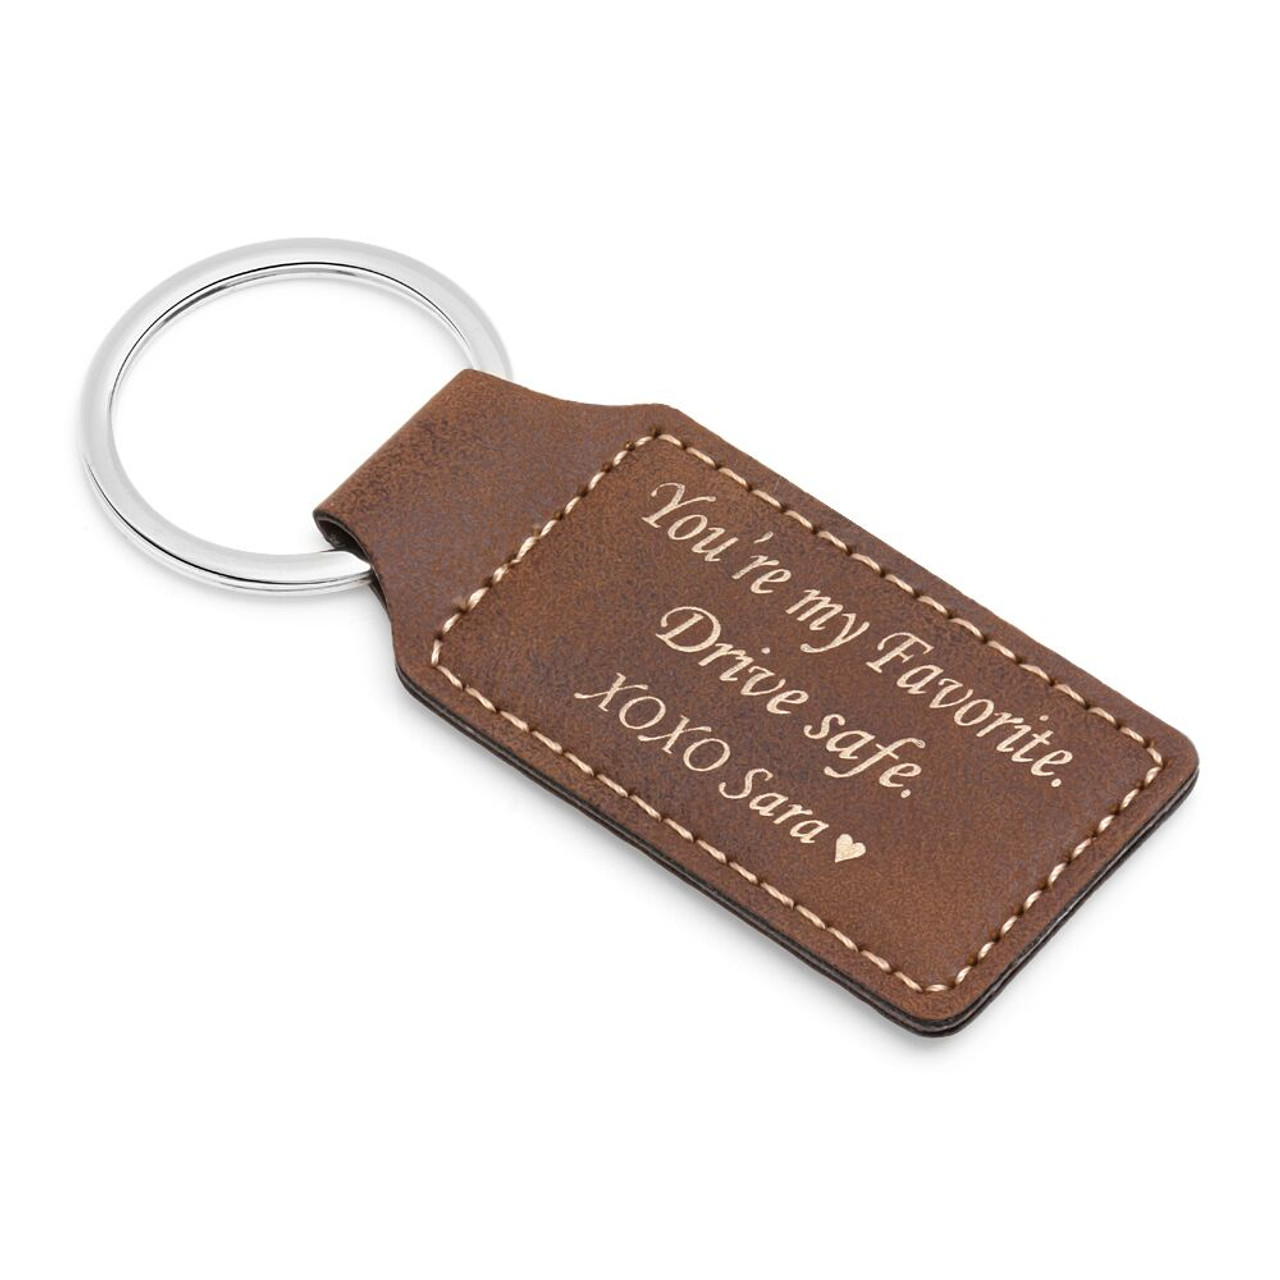 Groomsman Gear Custom Tan Leather Keychain with Personalized Engraving Yes